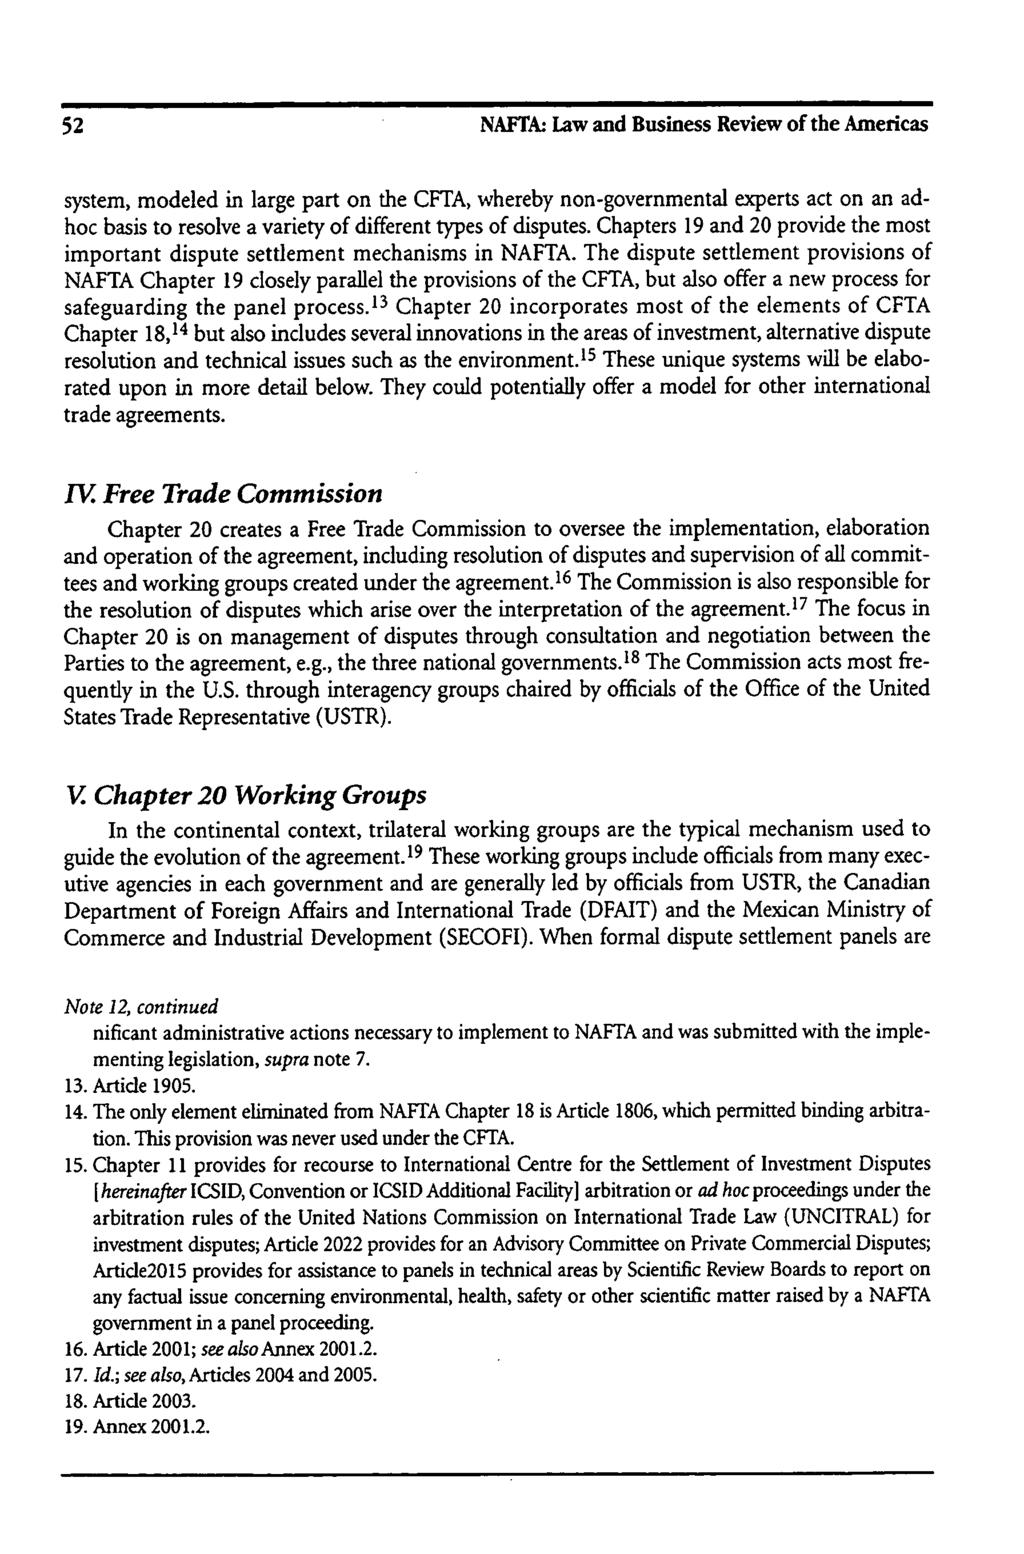 52 NAFTA. Law and Business Review of the Americas system, modeled in large part on the CFTA, whereby non-governmental experts act on an adhoc basis to resolve a variety of different types of disputes.